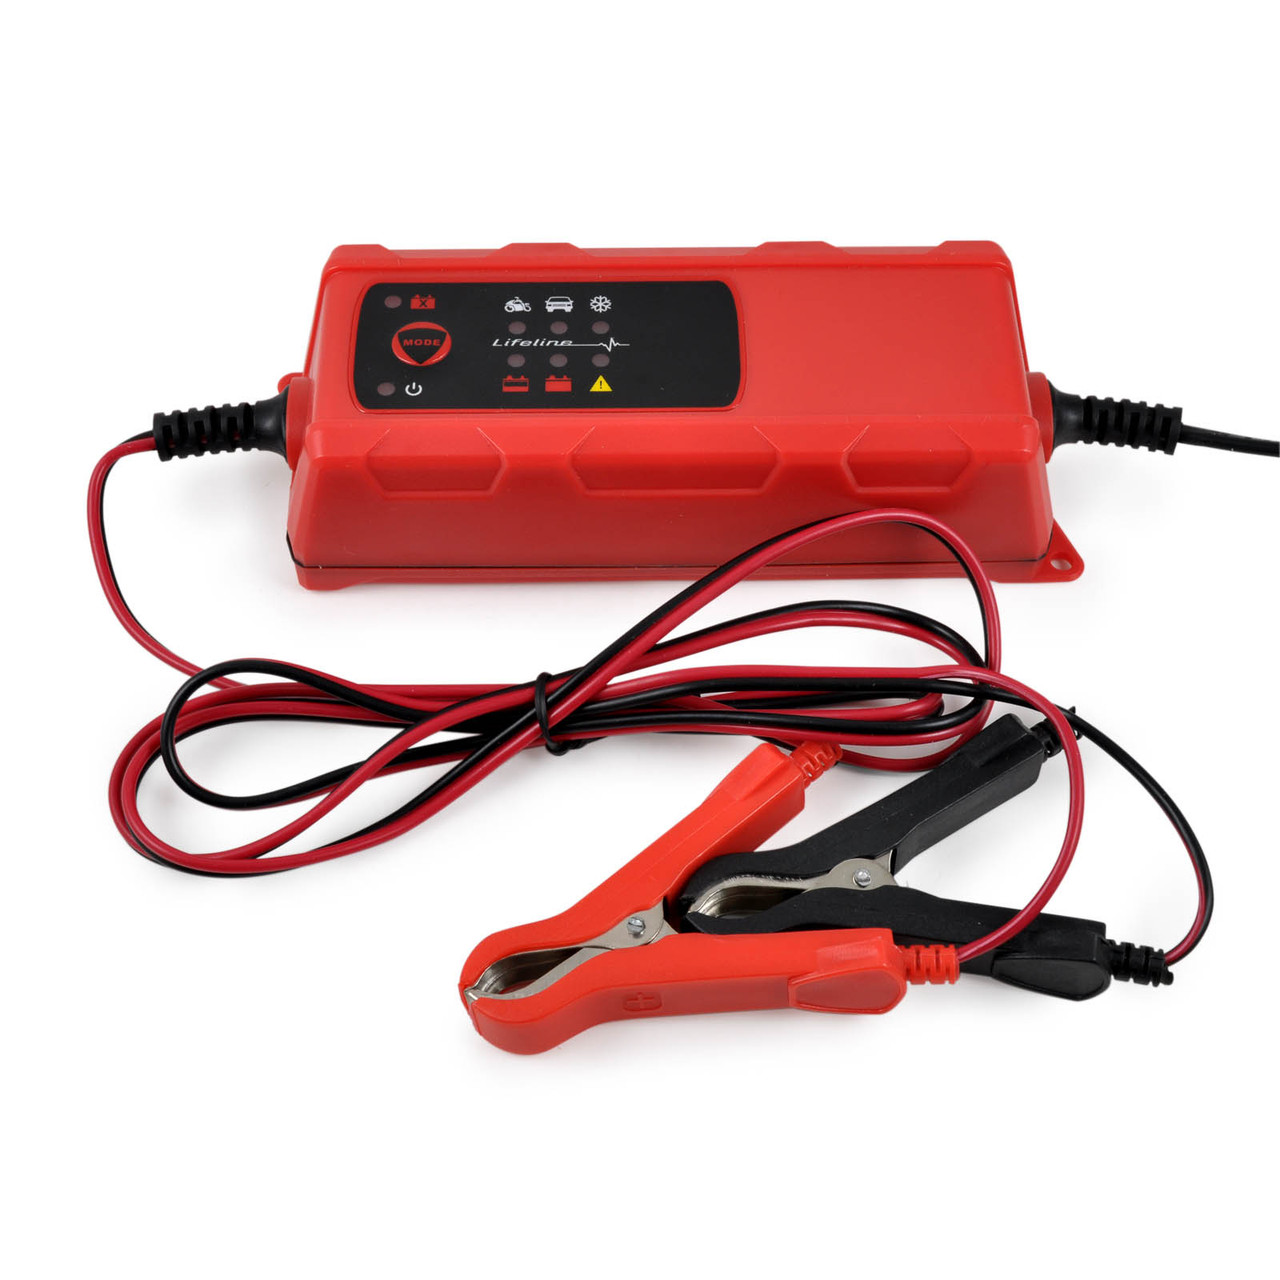  Ampstore B6001 6v and 12v Intelligent Trickle Charger and Battery Maintenance Conditioner - Single Item